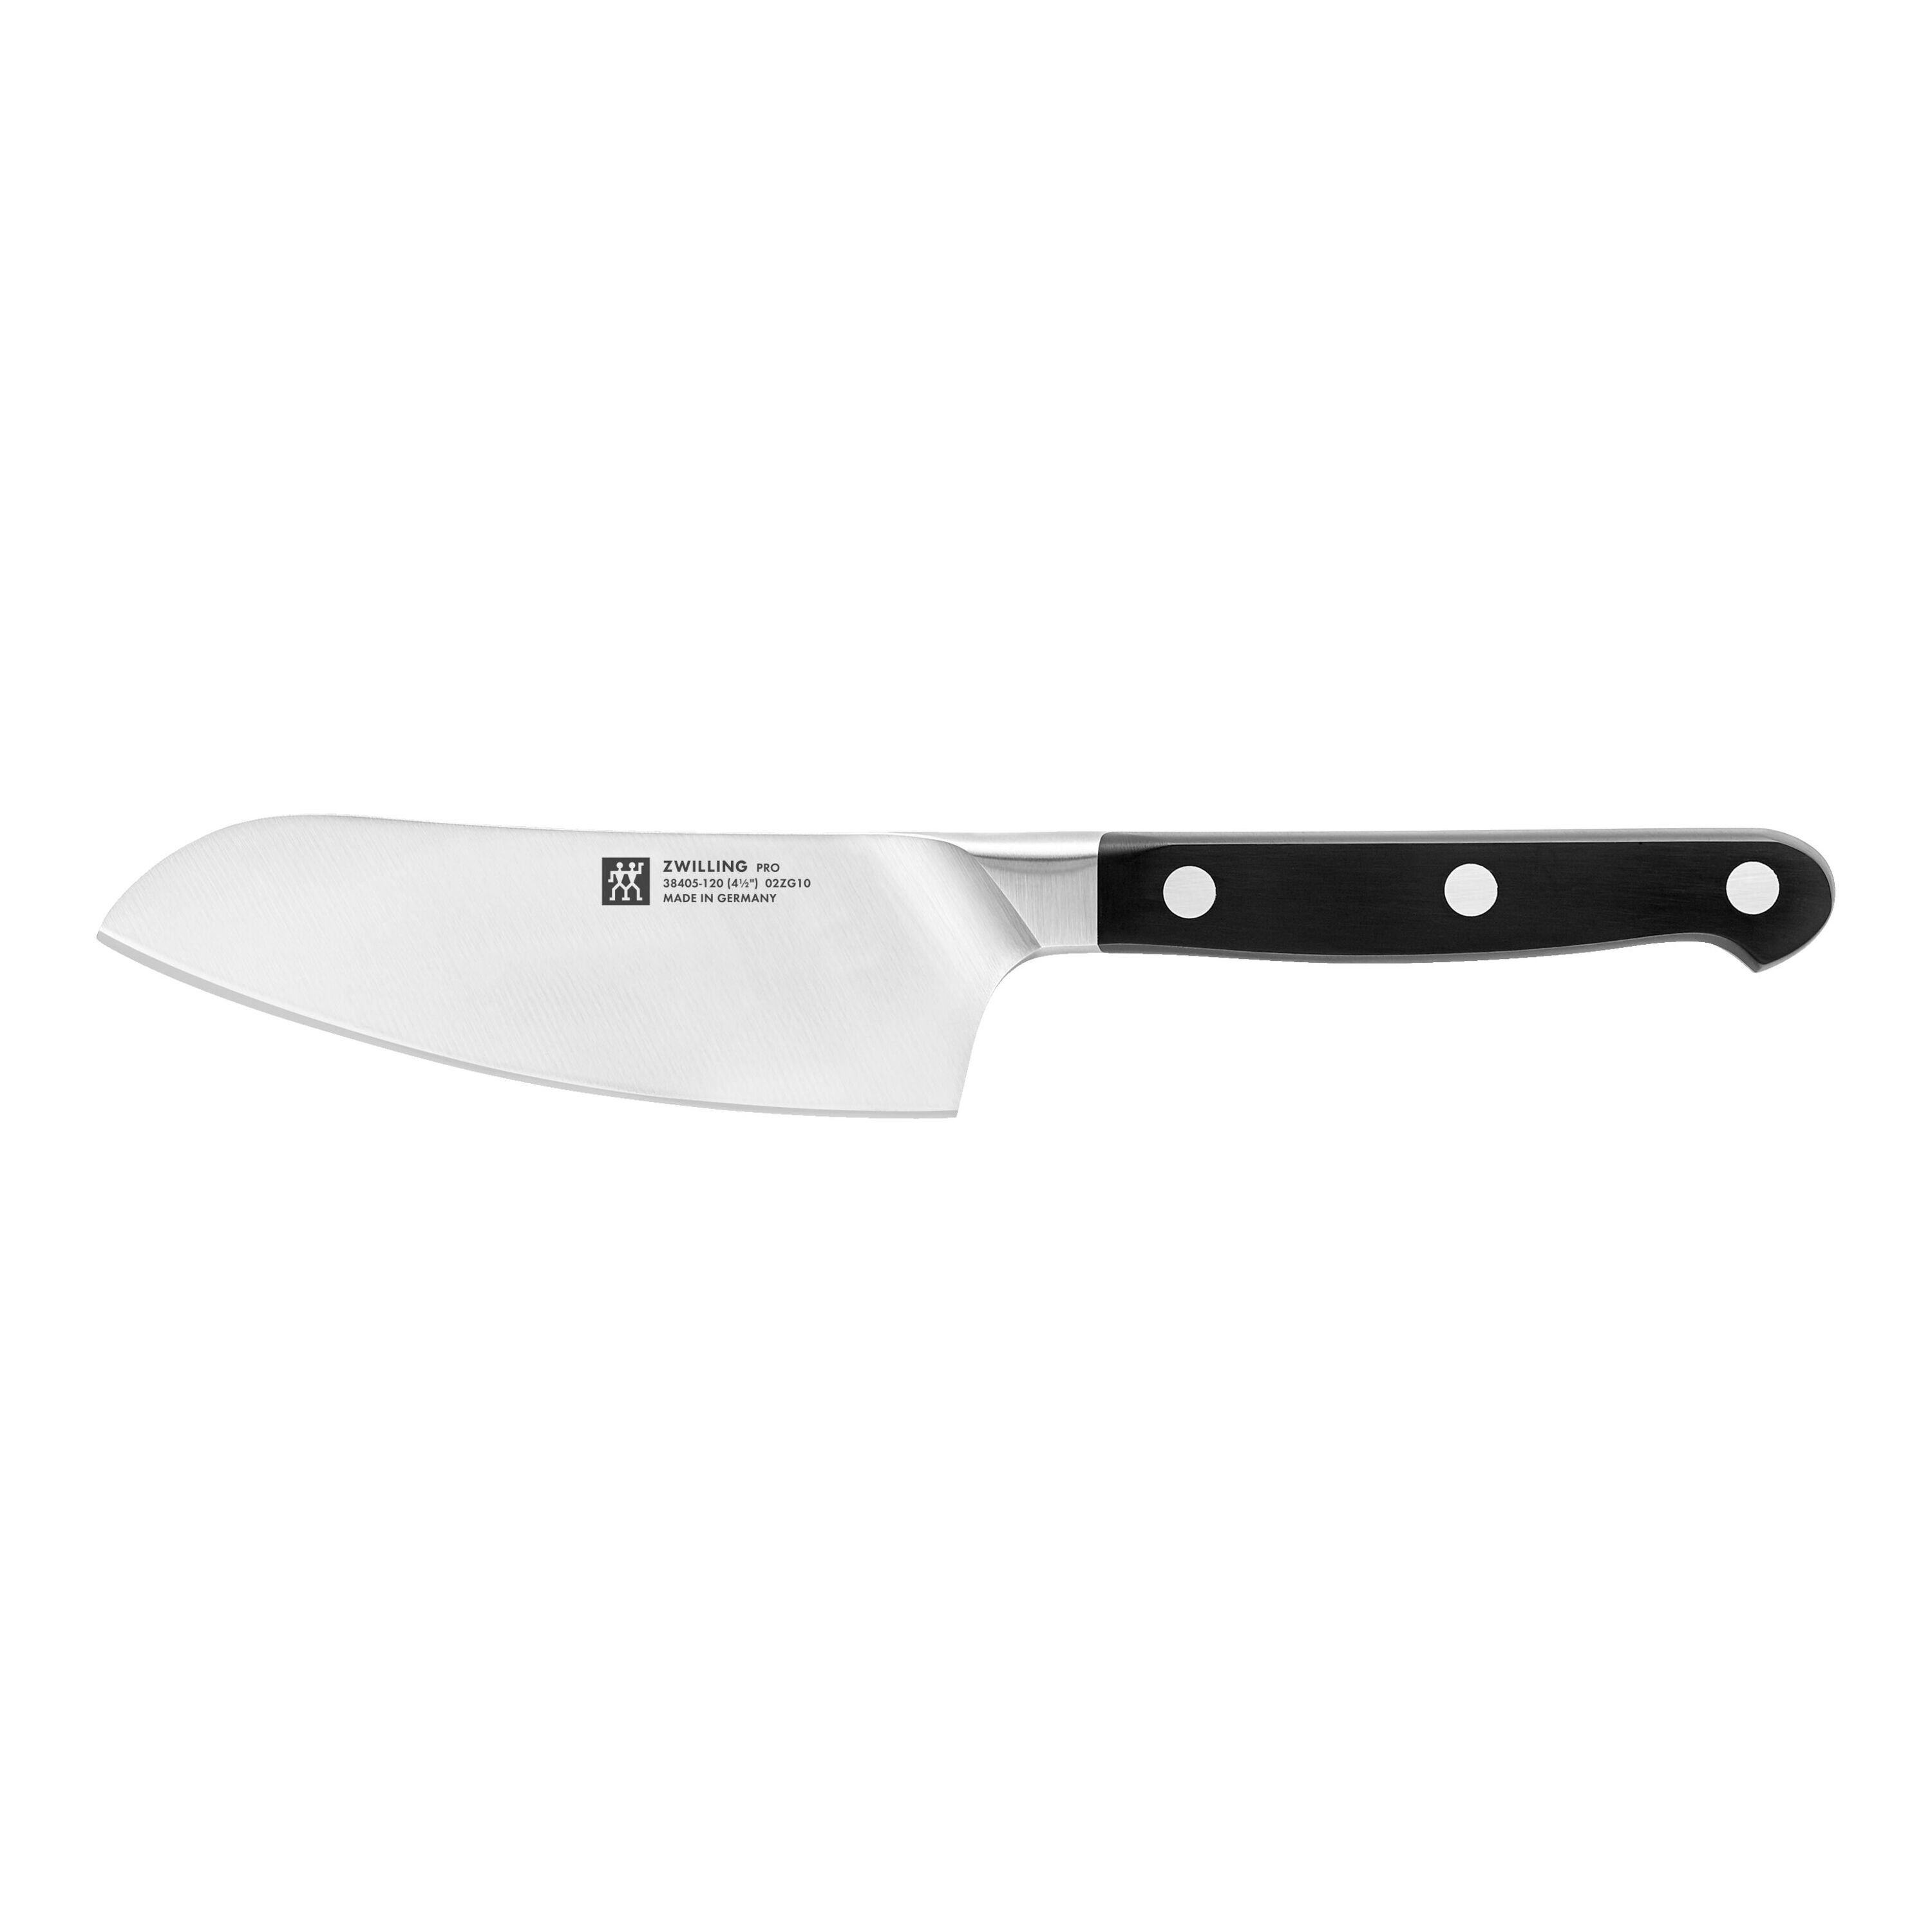 https://www.zwilling.com/on/demandware.static/-/Sites-zwilling-master-catalog/default/dwbc9a59e2/images/large/38405-120-0_1.jpg